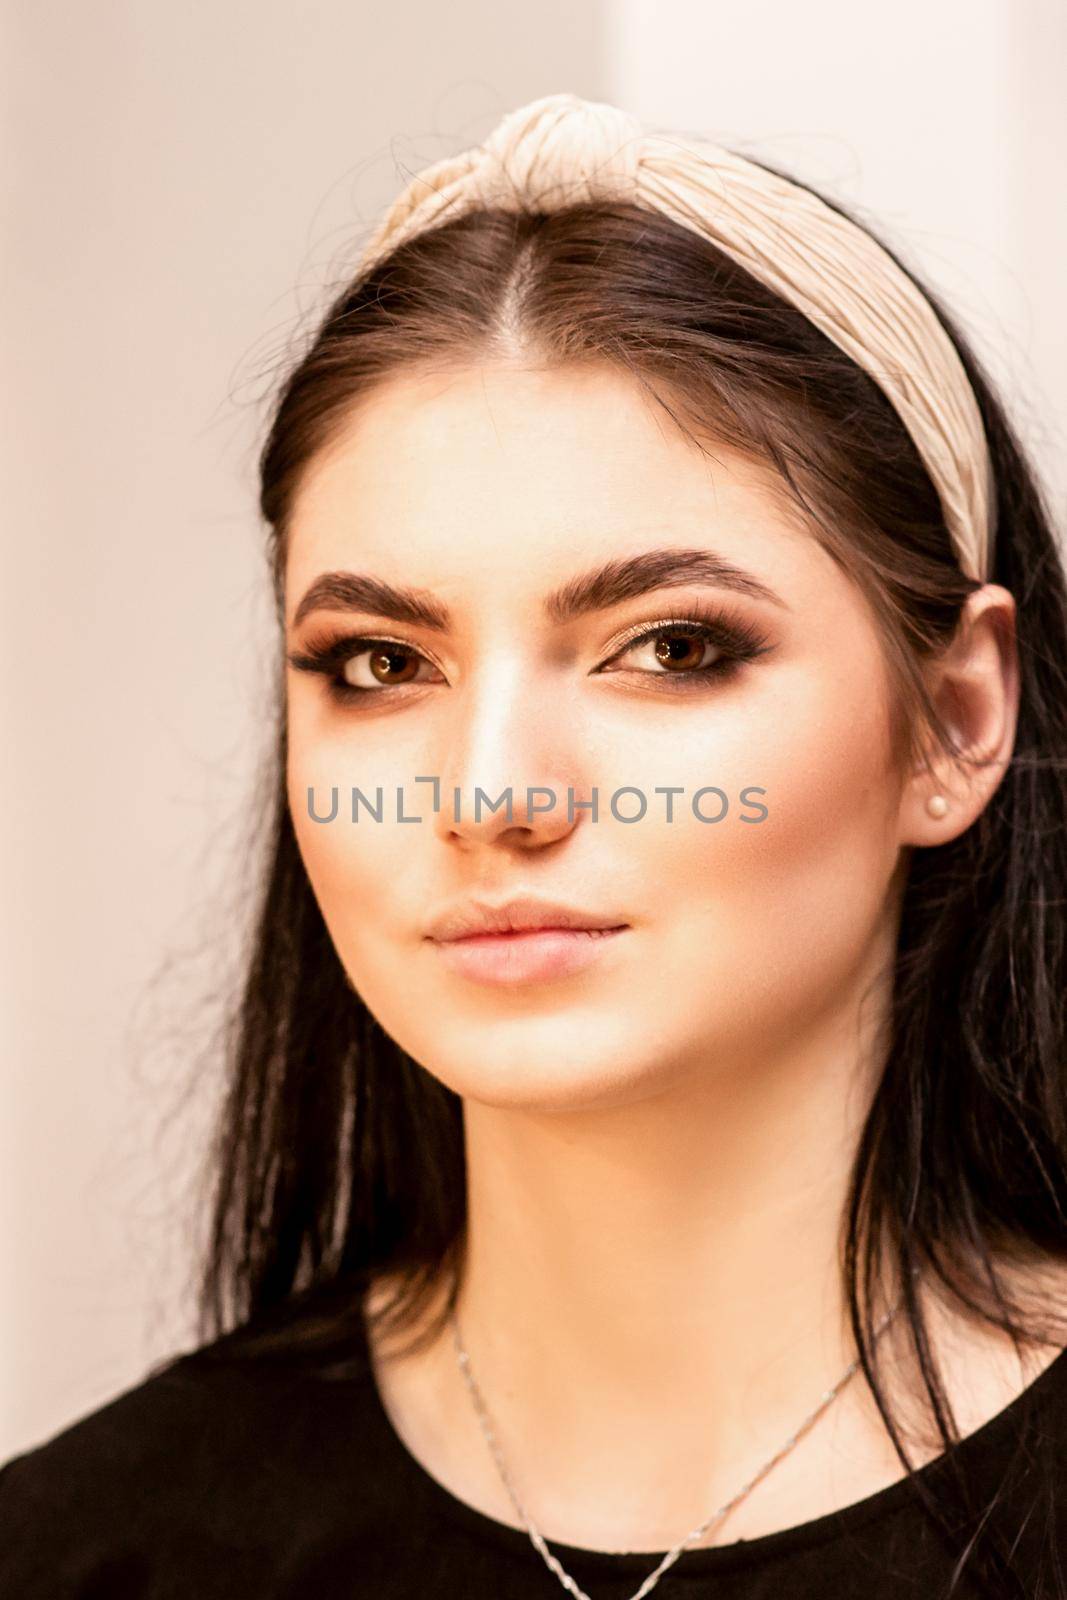 The fashionable young woman. Portrait of the beautiful female model with long hair and makeup. Beauty young caucasian woman with a hoop on her head